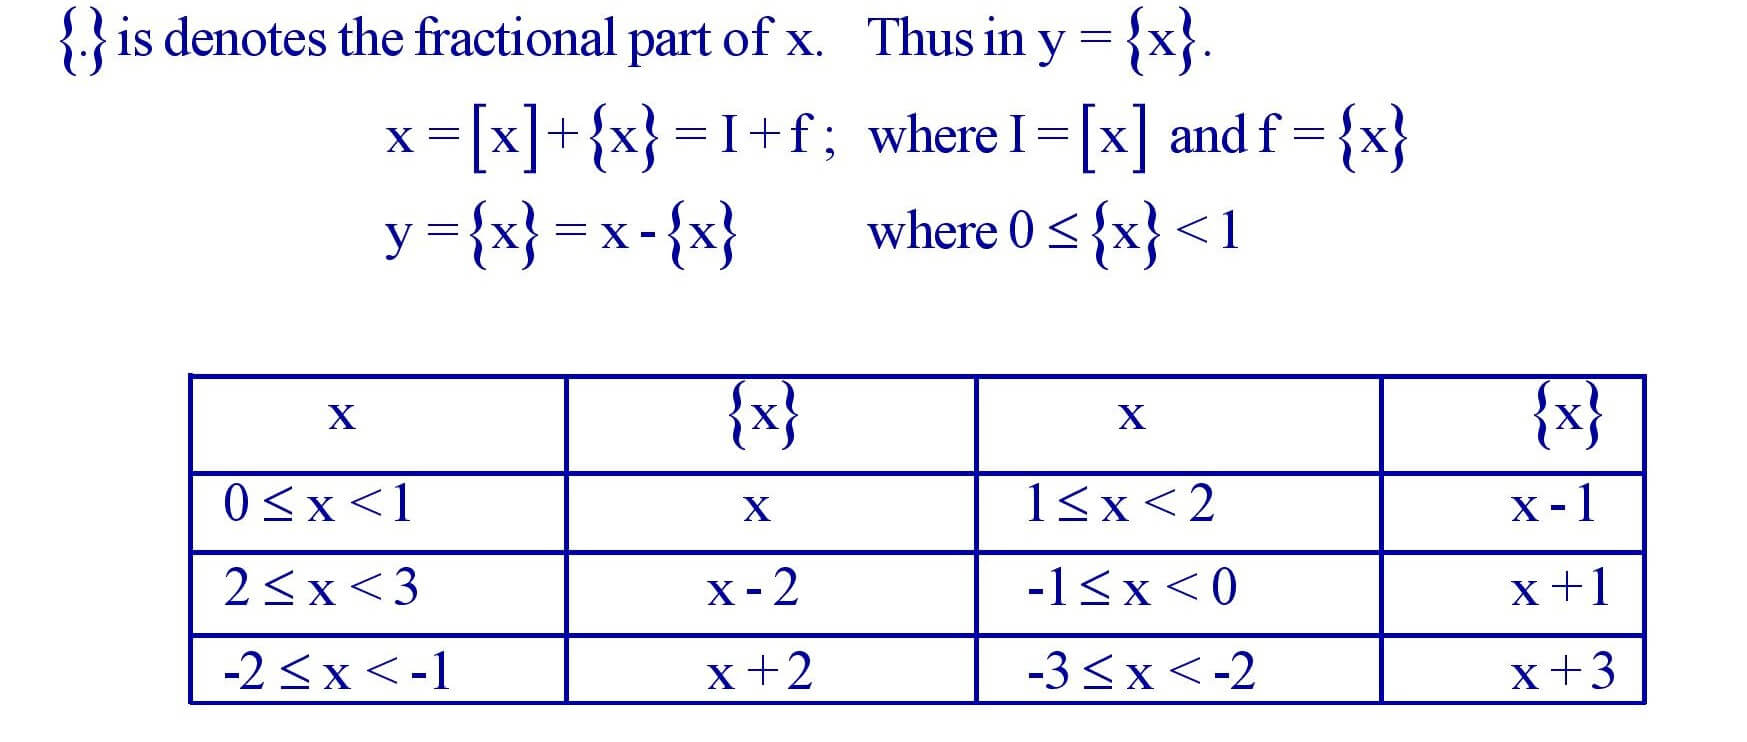 Fractional part function